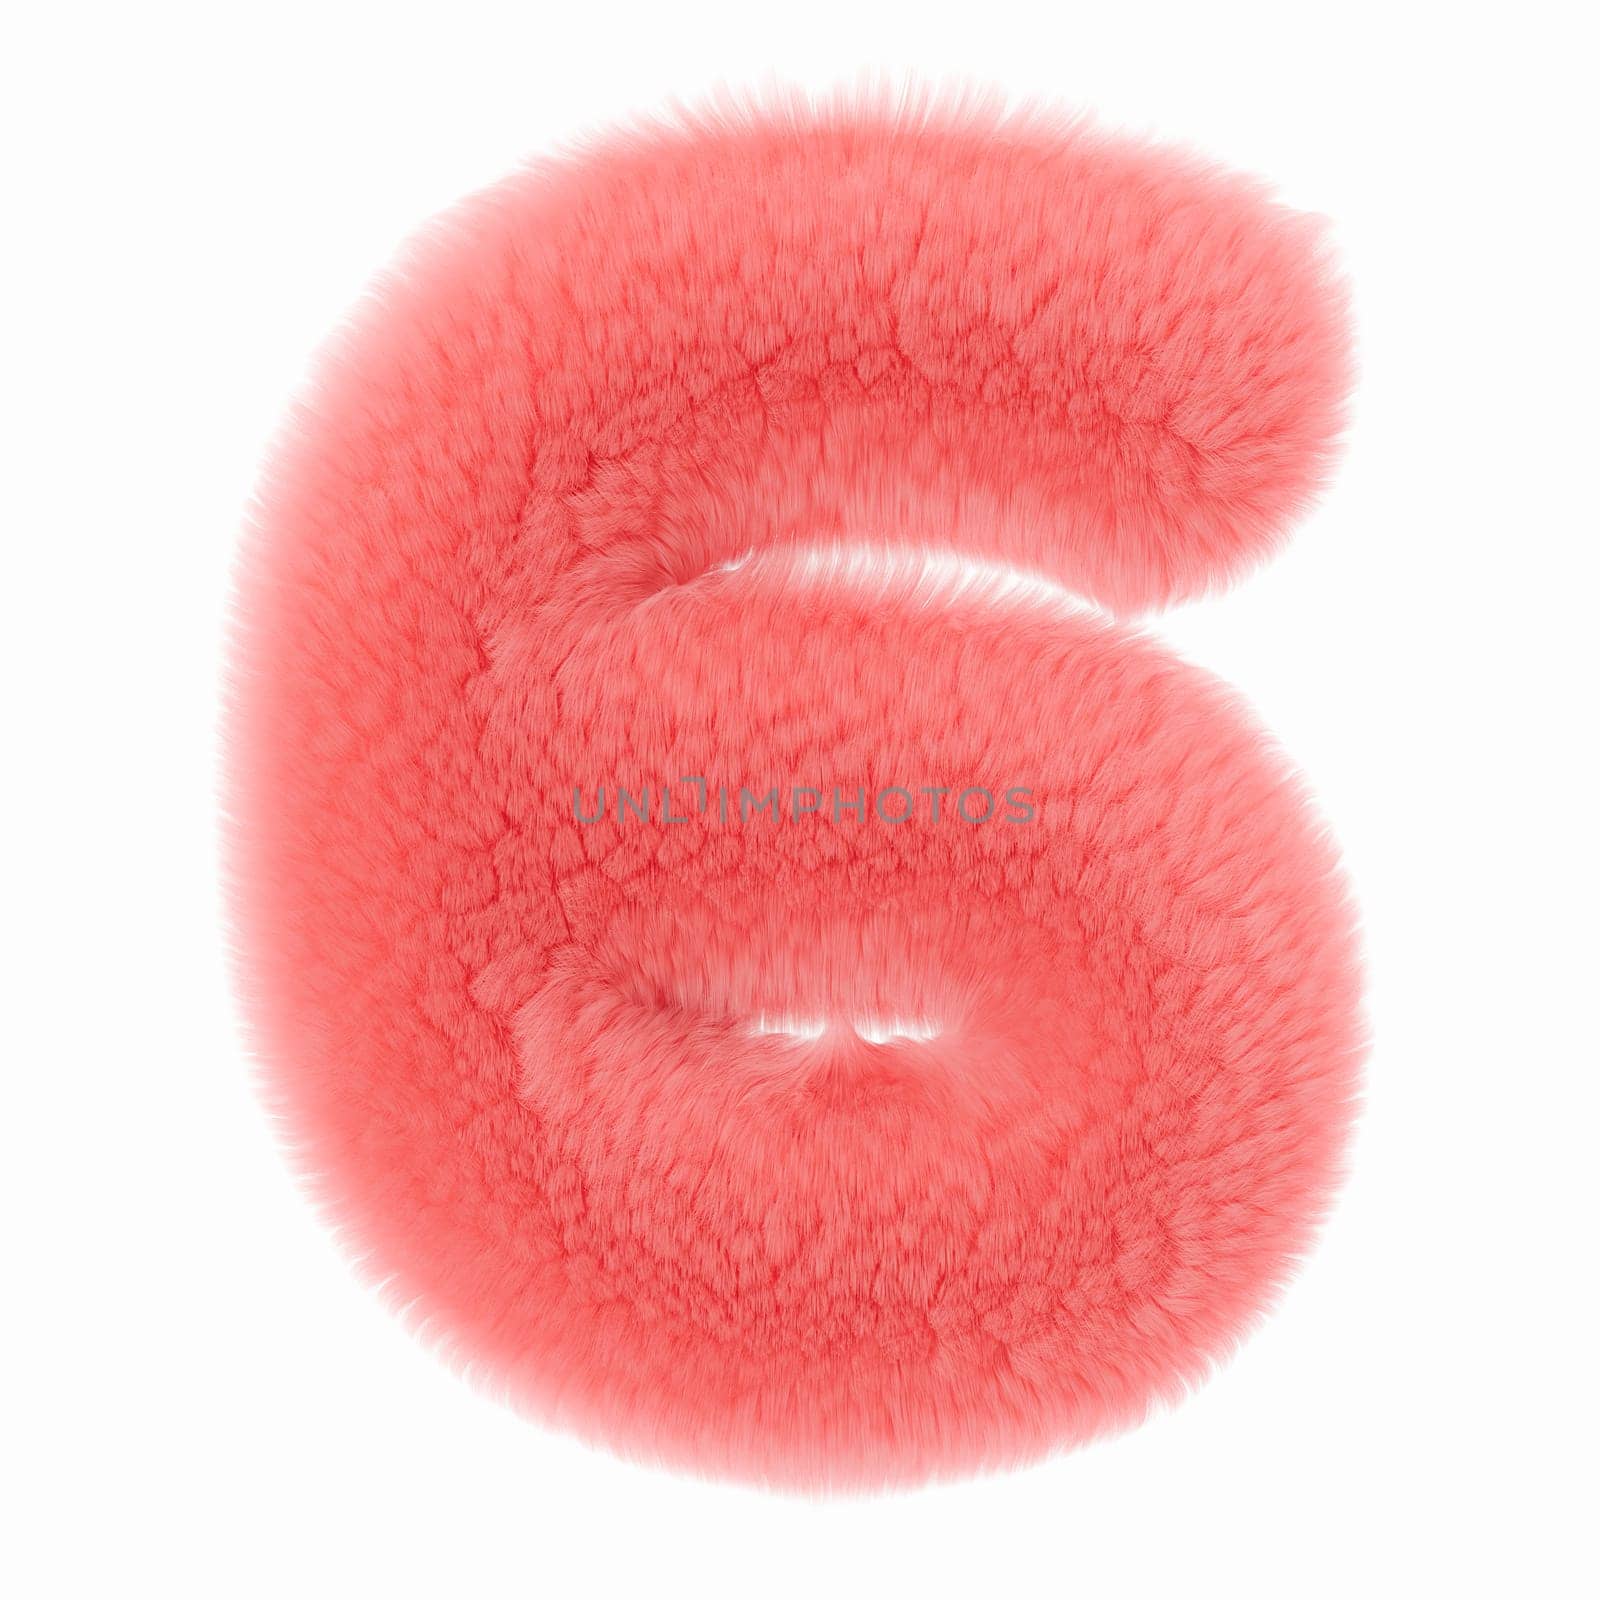 Pink and fluffy 3D number six, isolated on white background. Furry, soft and hairy symbol 6. Trendy, cute design element. Cut out object. 3D rendering